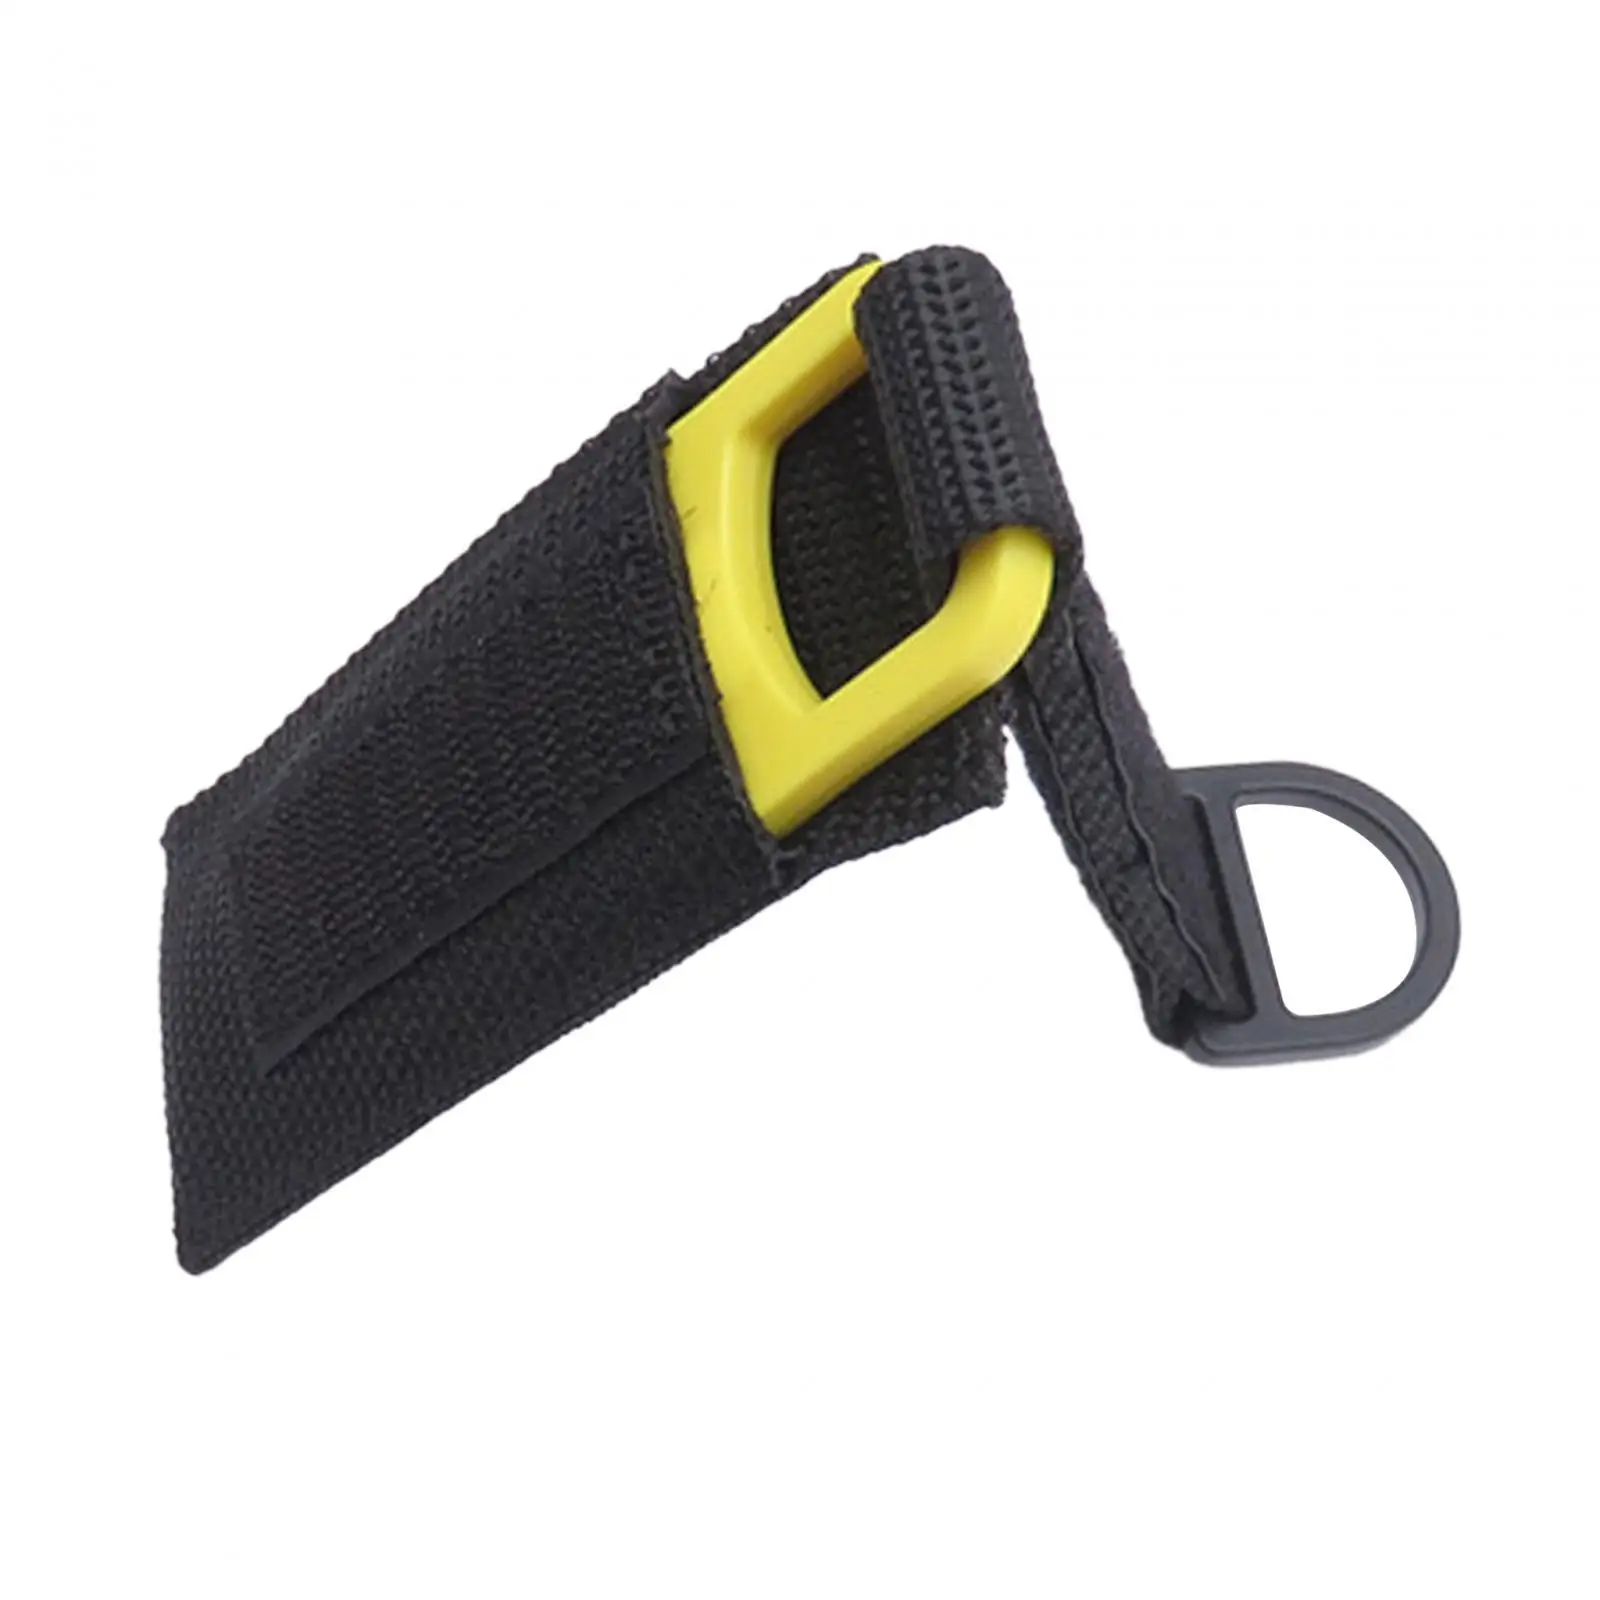 Diving Line Cutter Diver Line Cutter for Free Diving Water Sports Underwater